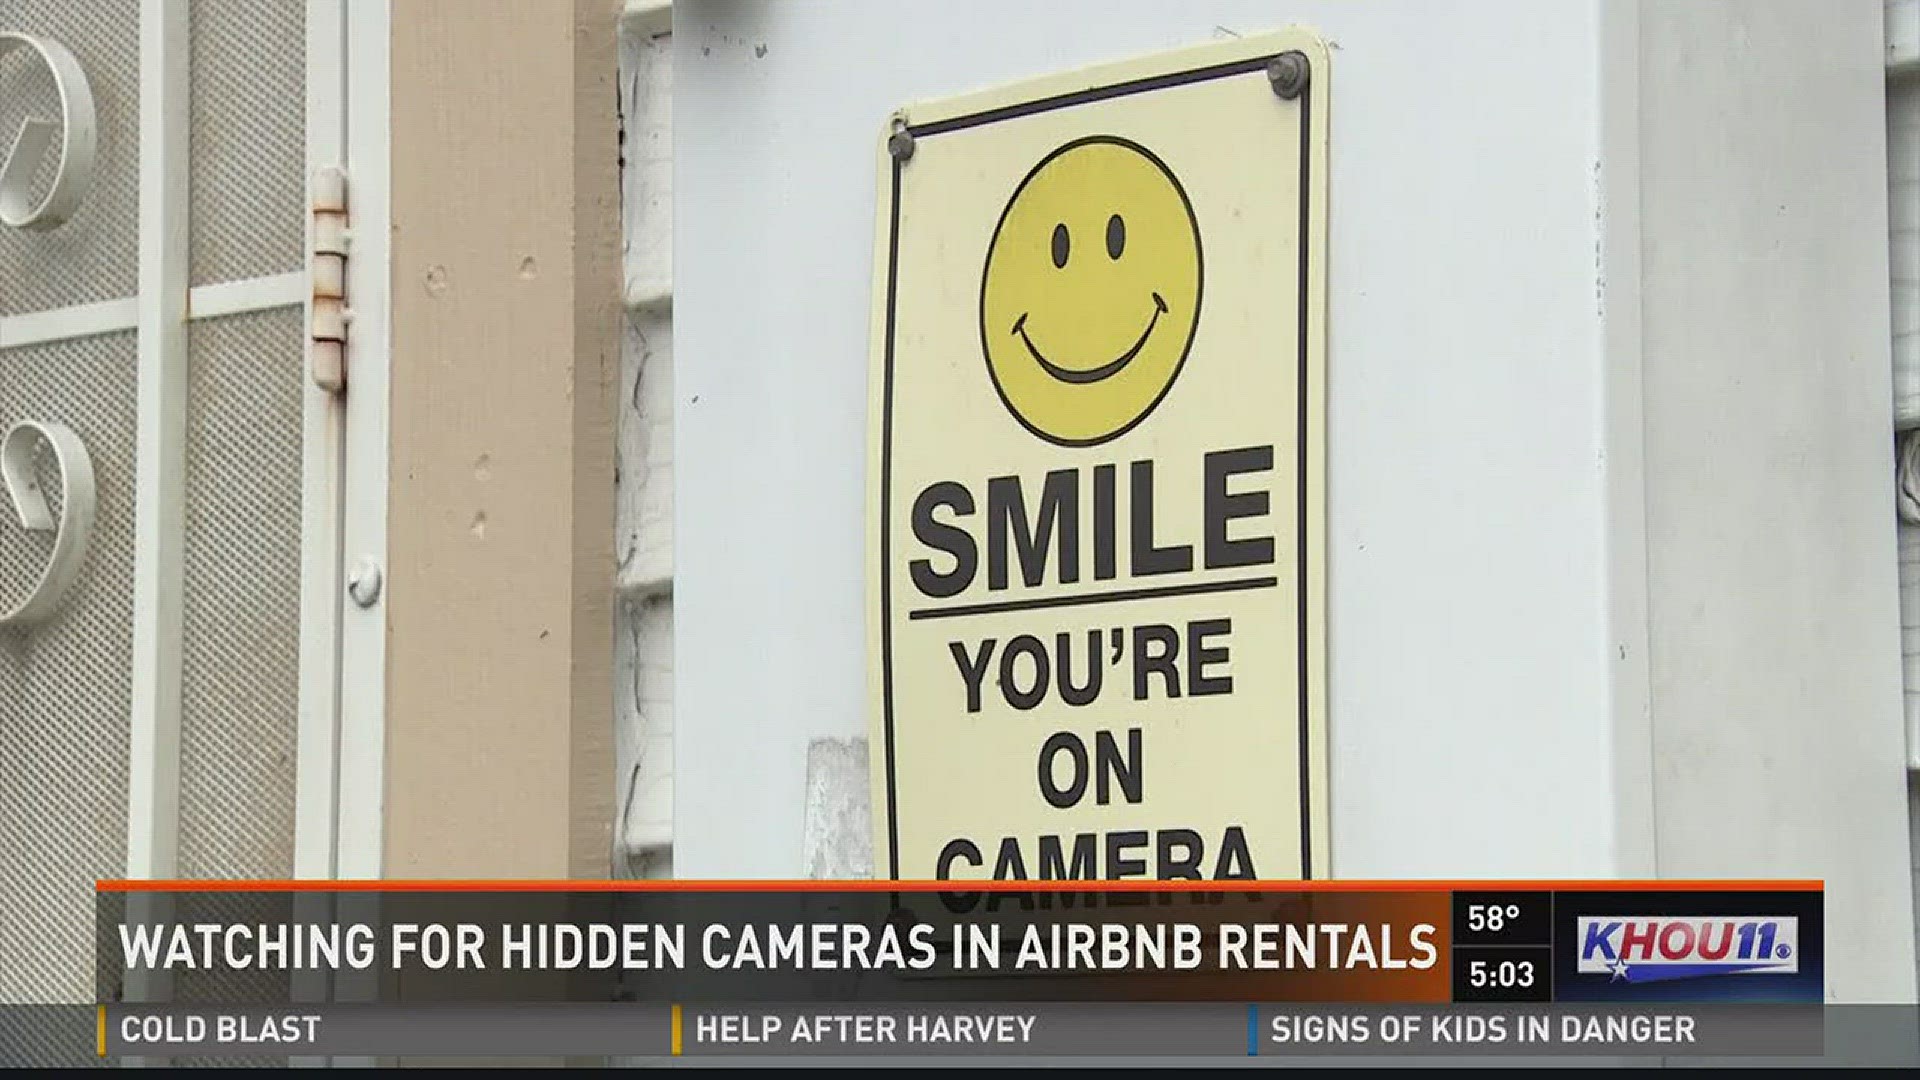 How you can protect yourself and look for hidden cameras in AirBNB rentals.